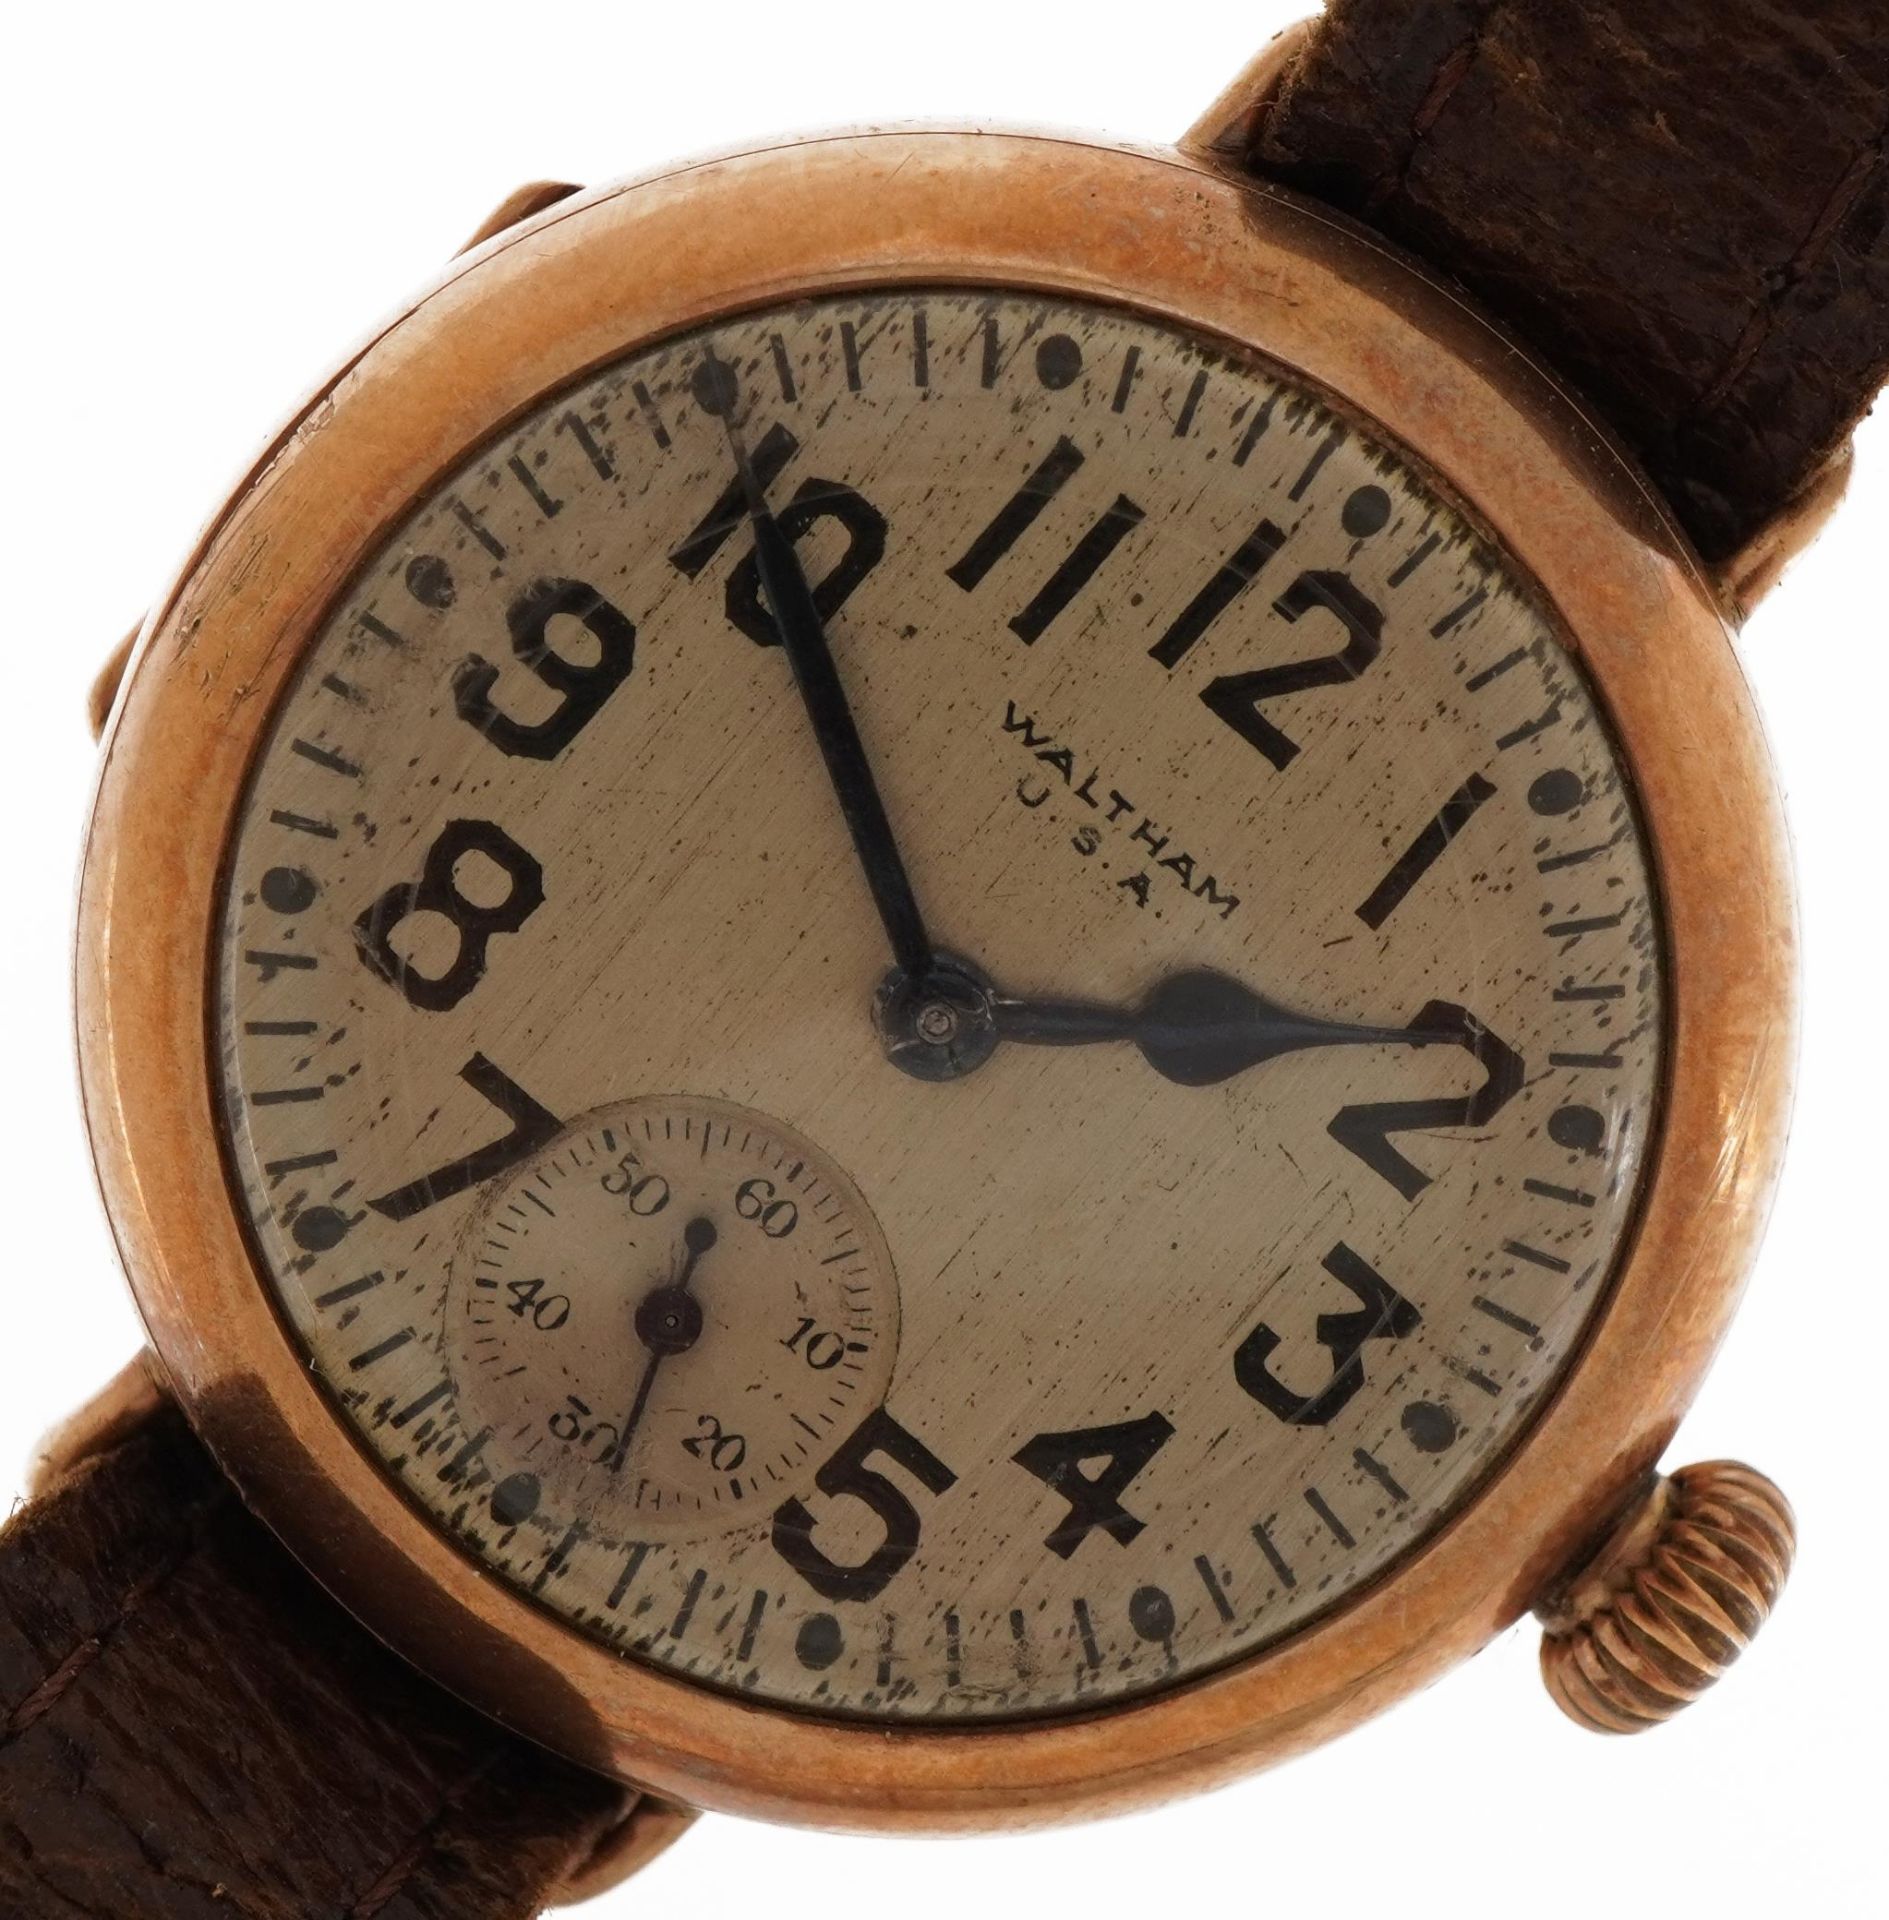 Waltham, gentlemen's 9ct gold trench wristwatch, 31.5mm in diameter : For further information on